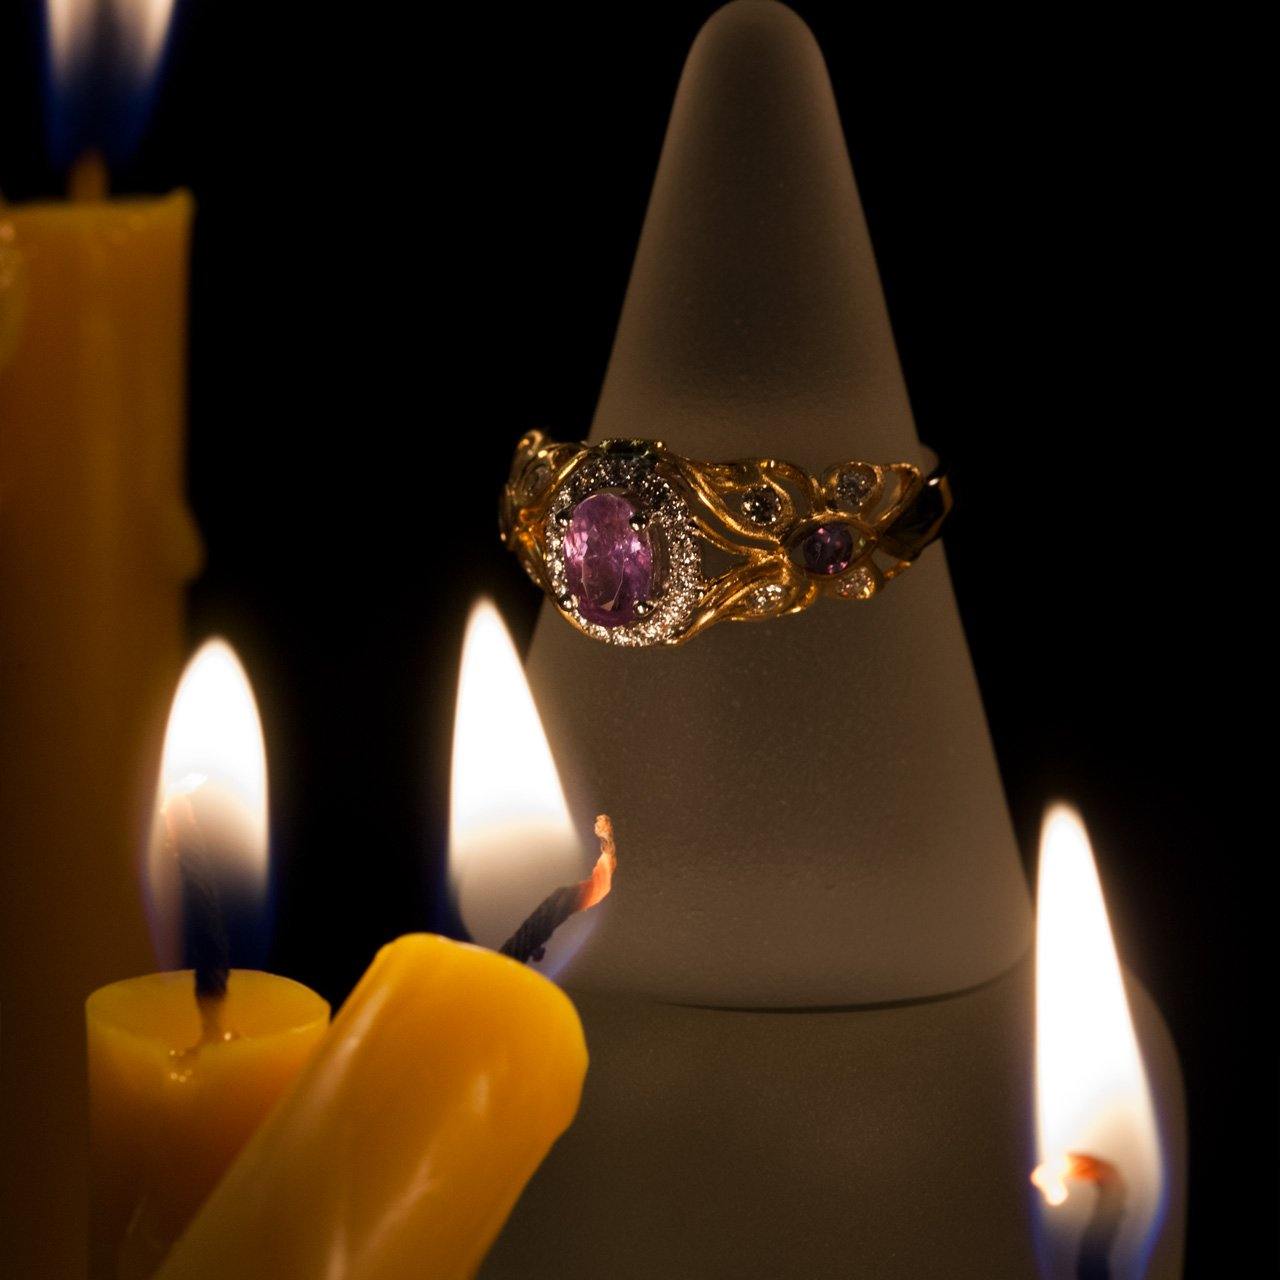 Elegant 0.67ct natural Alexandrite ring in 18k two-tone gold resting on a soft fabric